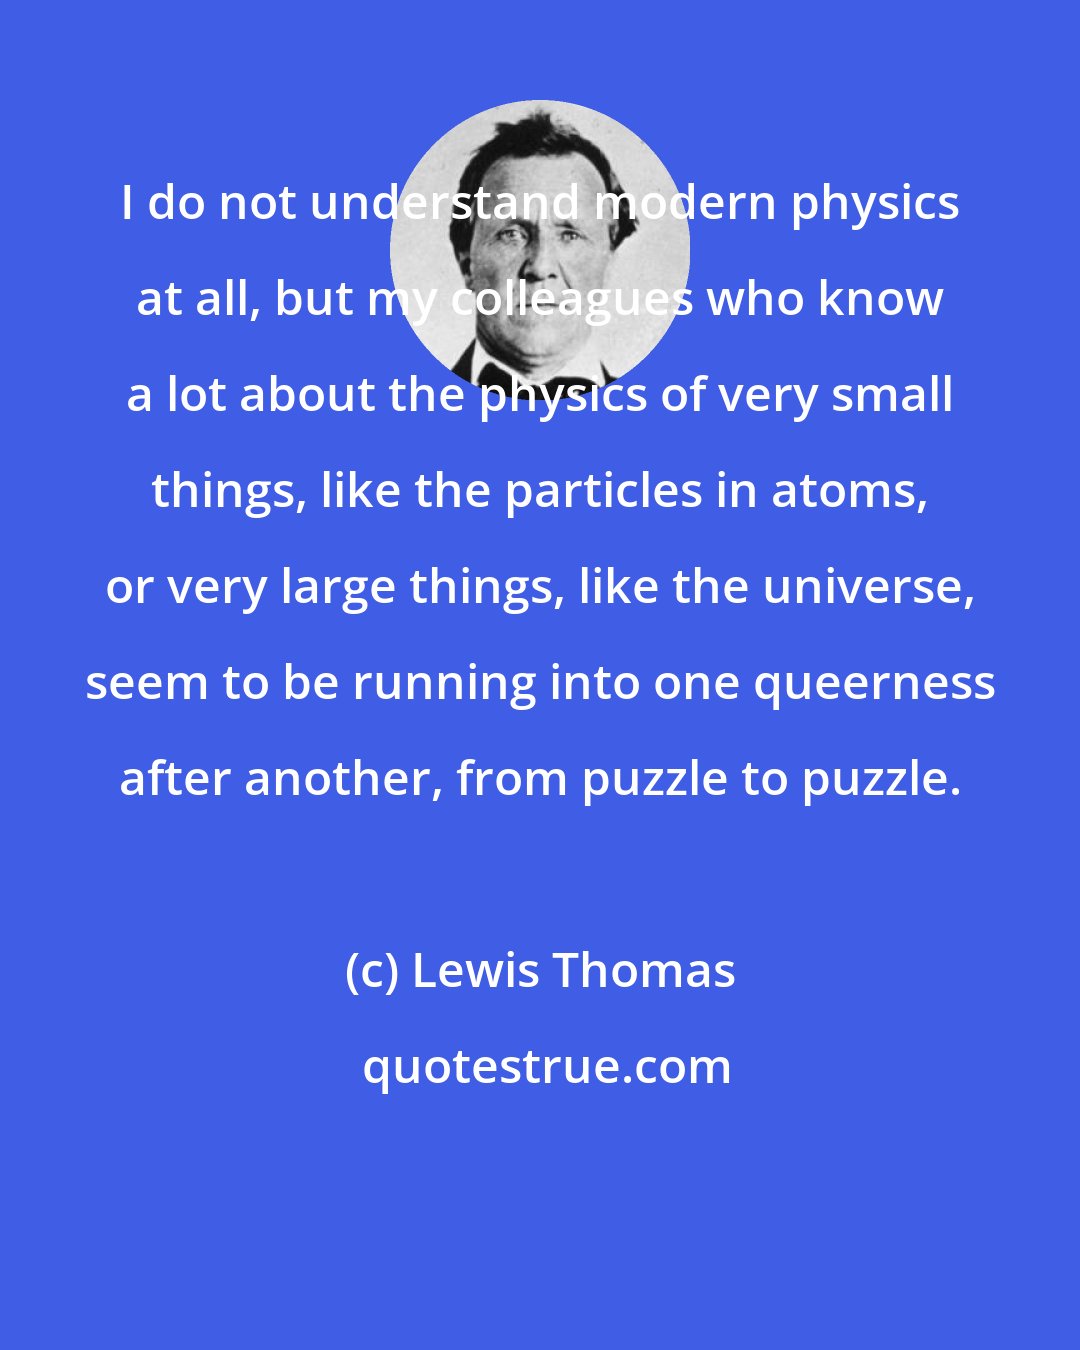 Lewis Thomas: I do not understand modern physics at all, but my colleagues who know a lot about the physics of very small things, like the particles in atoms, or very large things, like the universe, seem to be running into one queerness after another, from puzzle to puzzle.